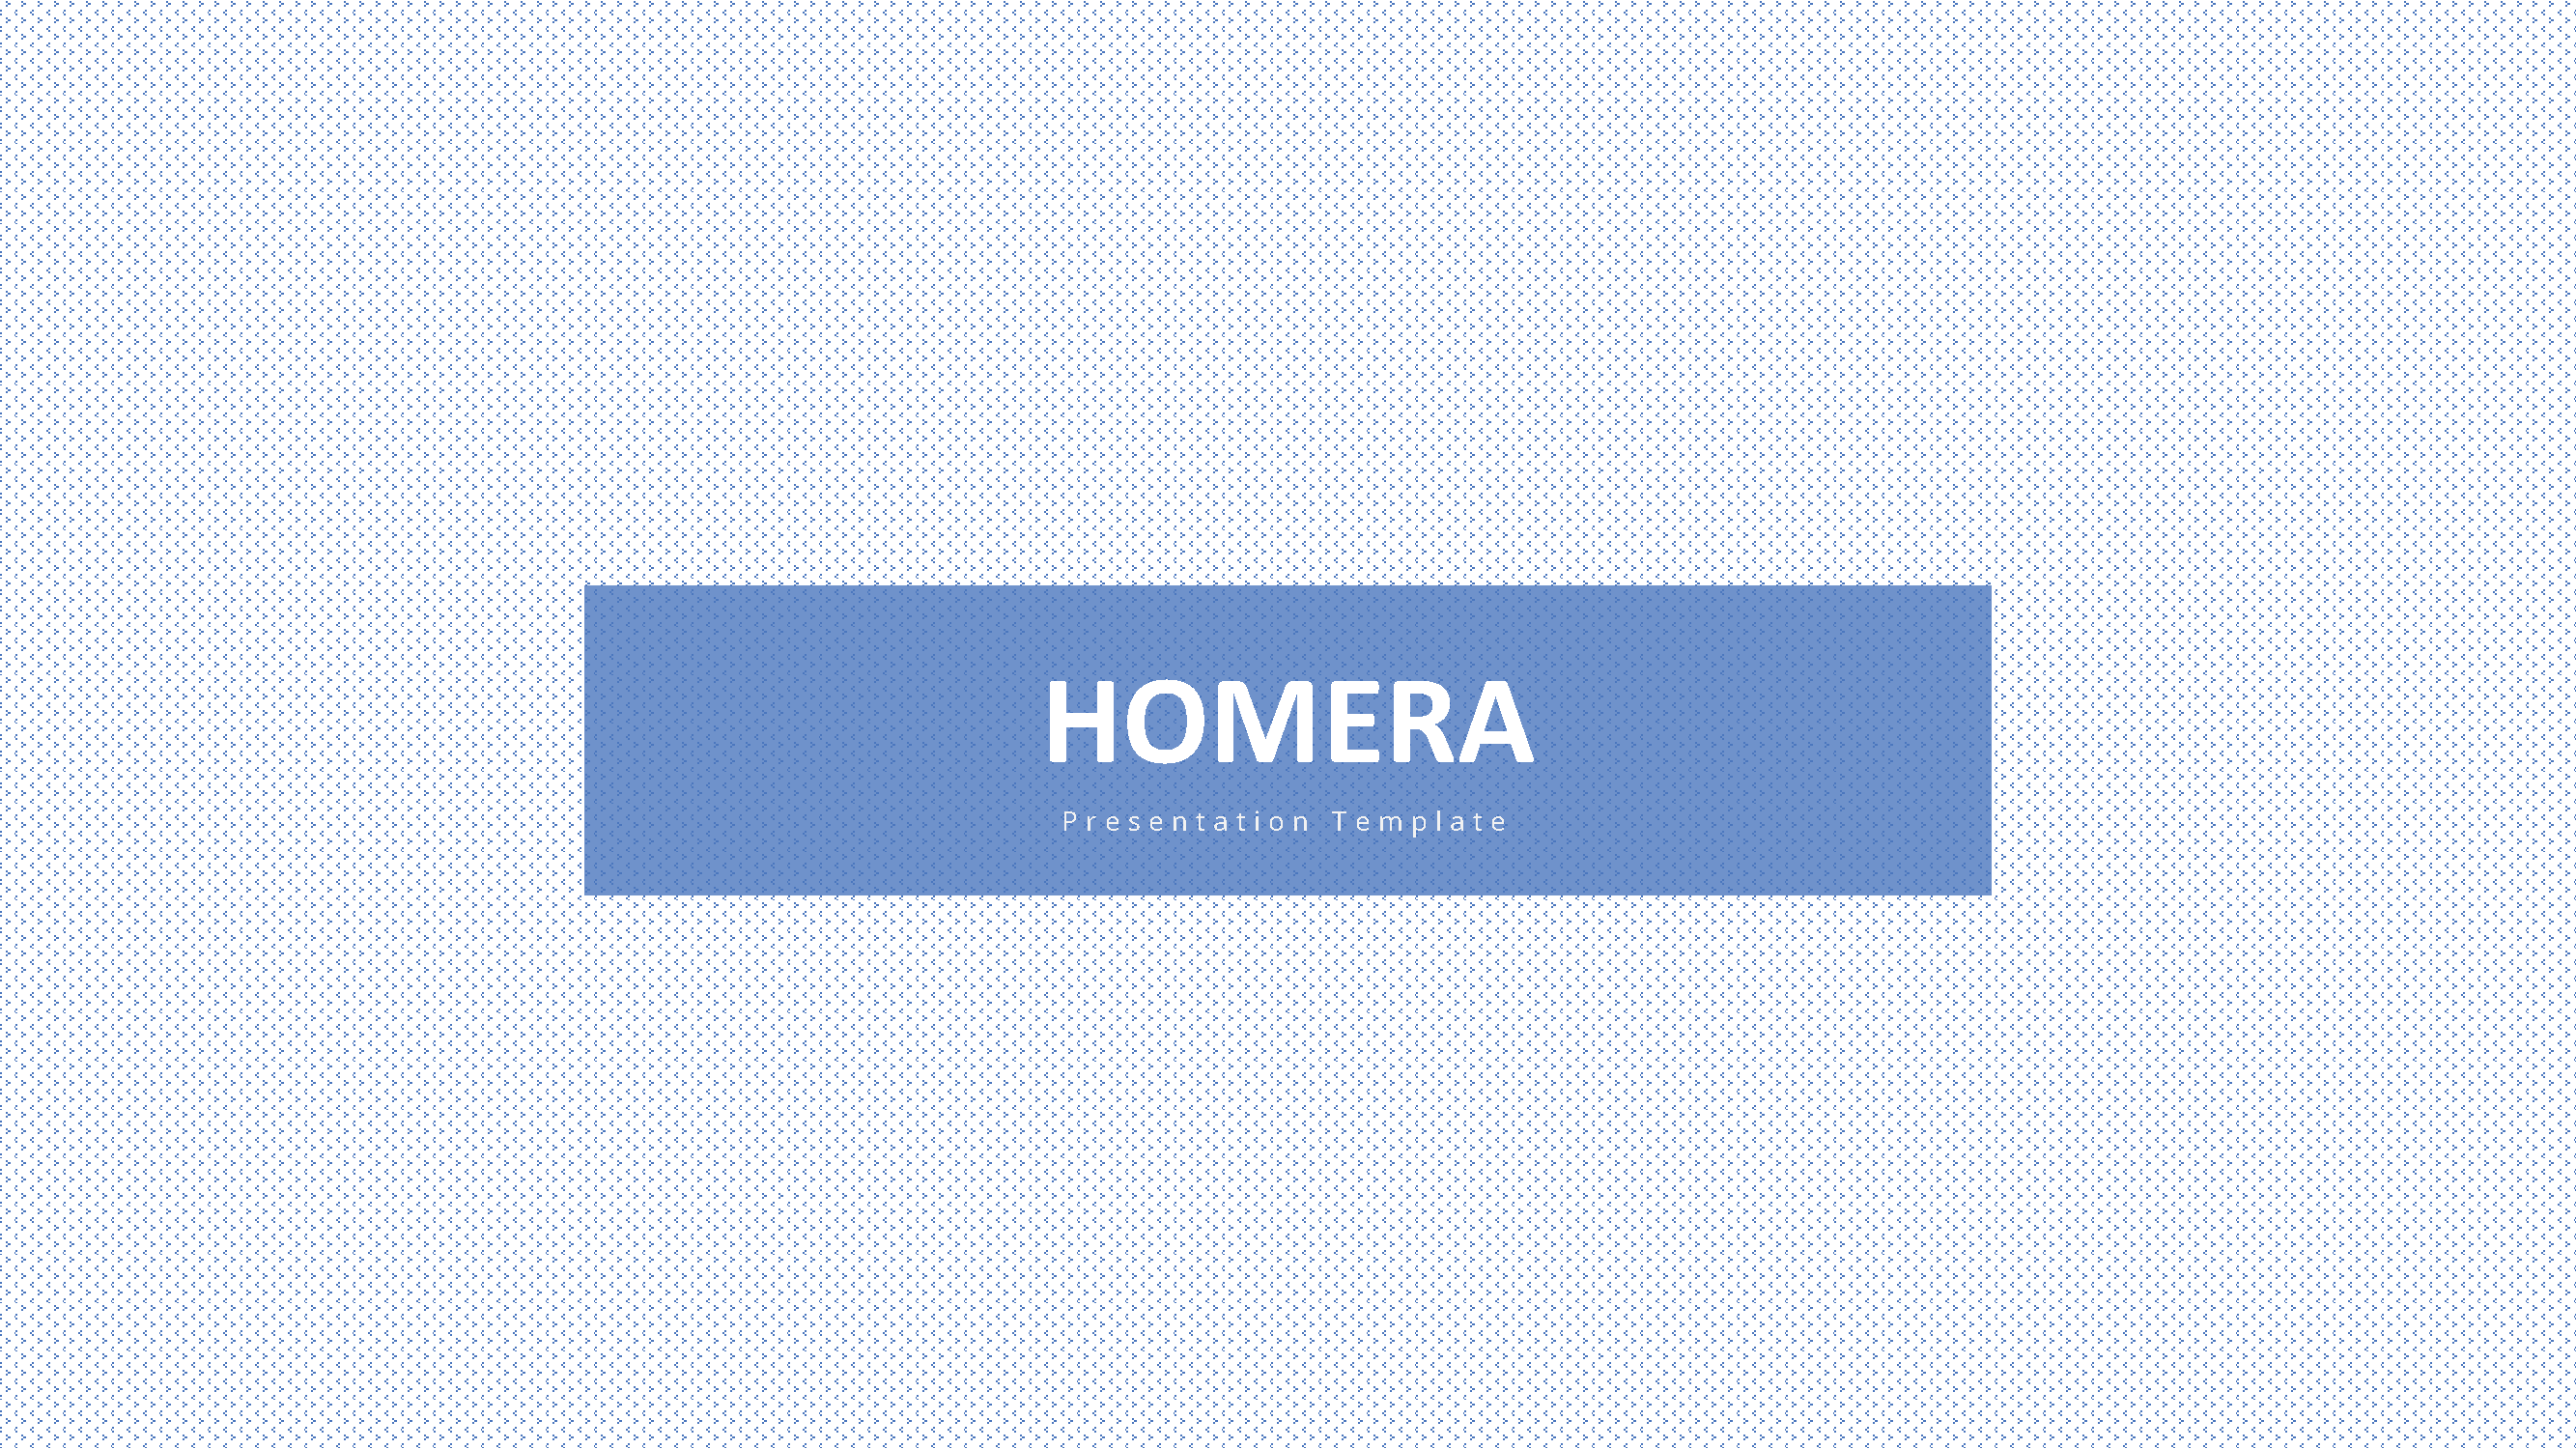 homera-real-estate-powerpoint-template-57PTLMX